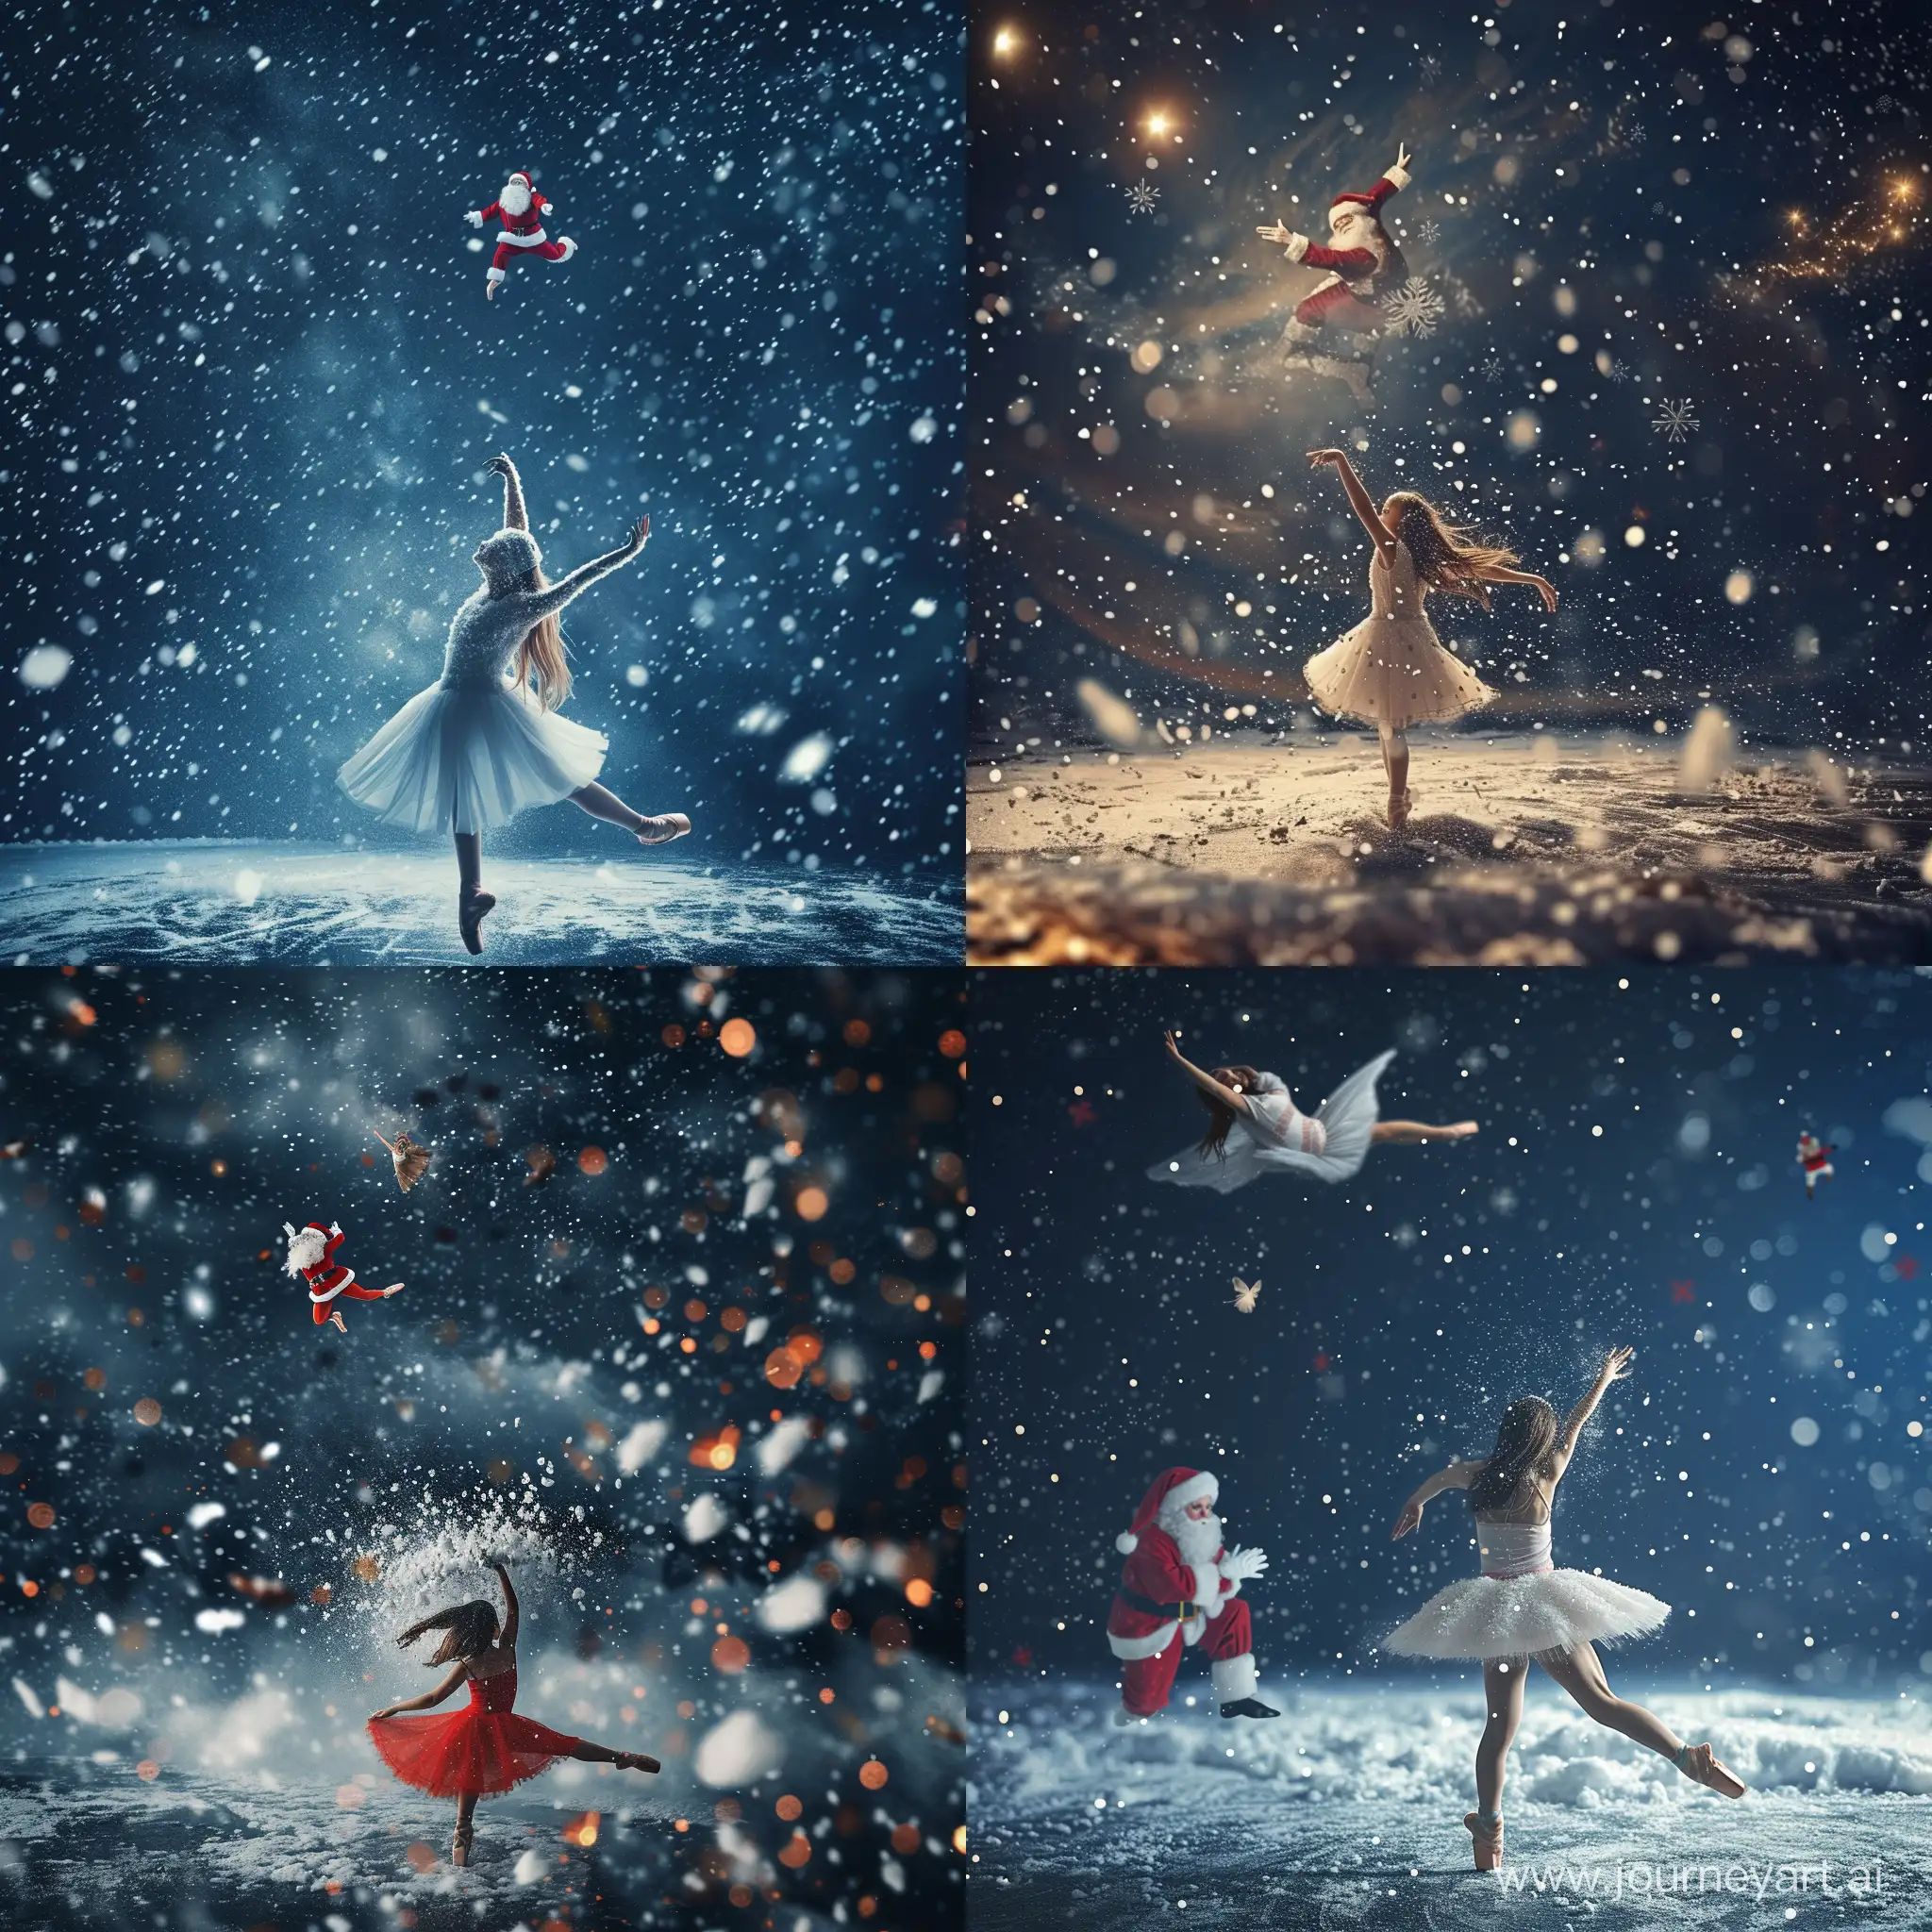 A girl dances ballet in the middle of falling snow, with snow covering parts of her and Santa Claus flying above her on a dark night illuminated by starlight.